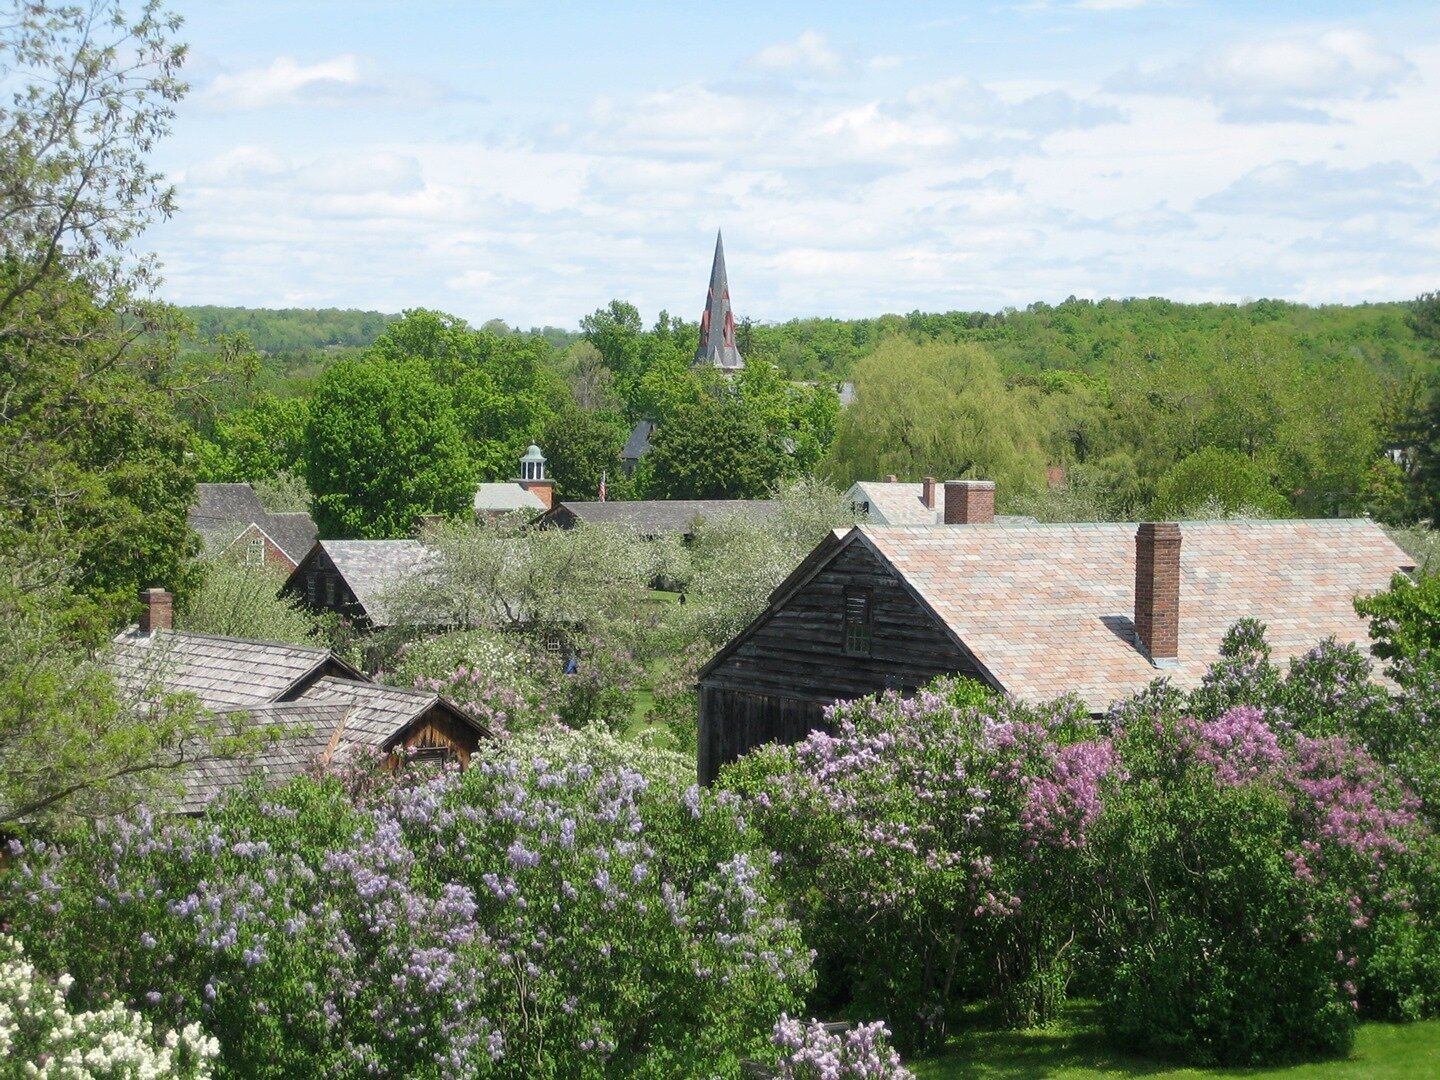 Rooftops of the Shelburne Museum during lilac season. Can't wait for warmer longer days ahead! Shelburne, VT.⁠
⁠
⁠
#historicpreservation #histpres #preservation #thisplacematters #architecture #history #oldhouse #oldhouselove #historichouse #vermont 